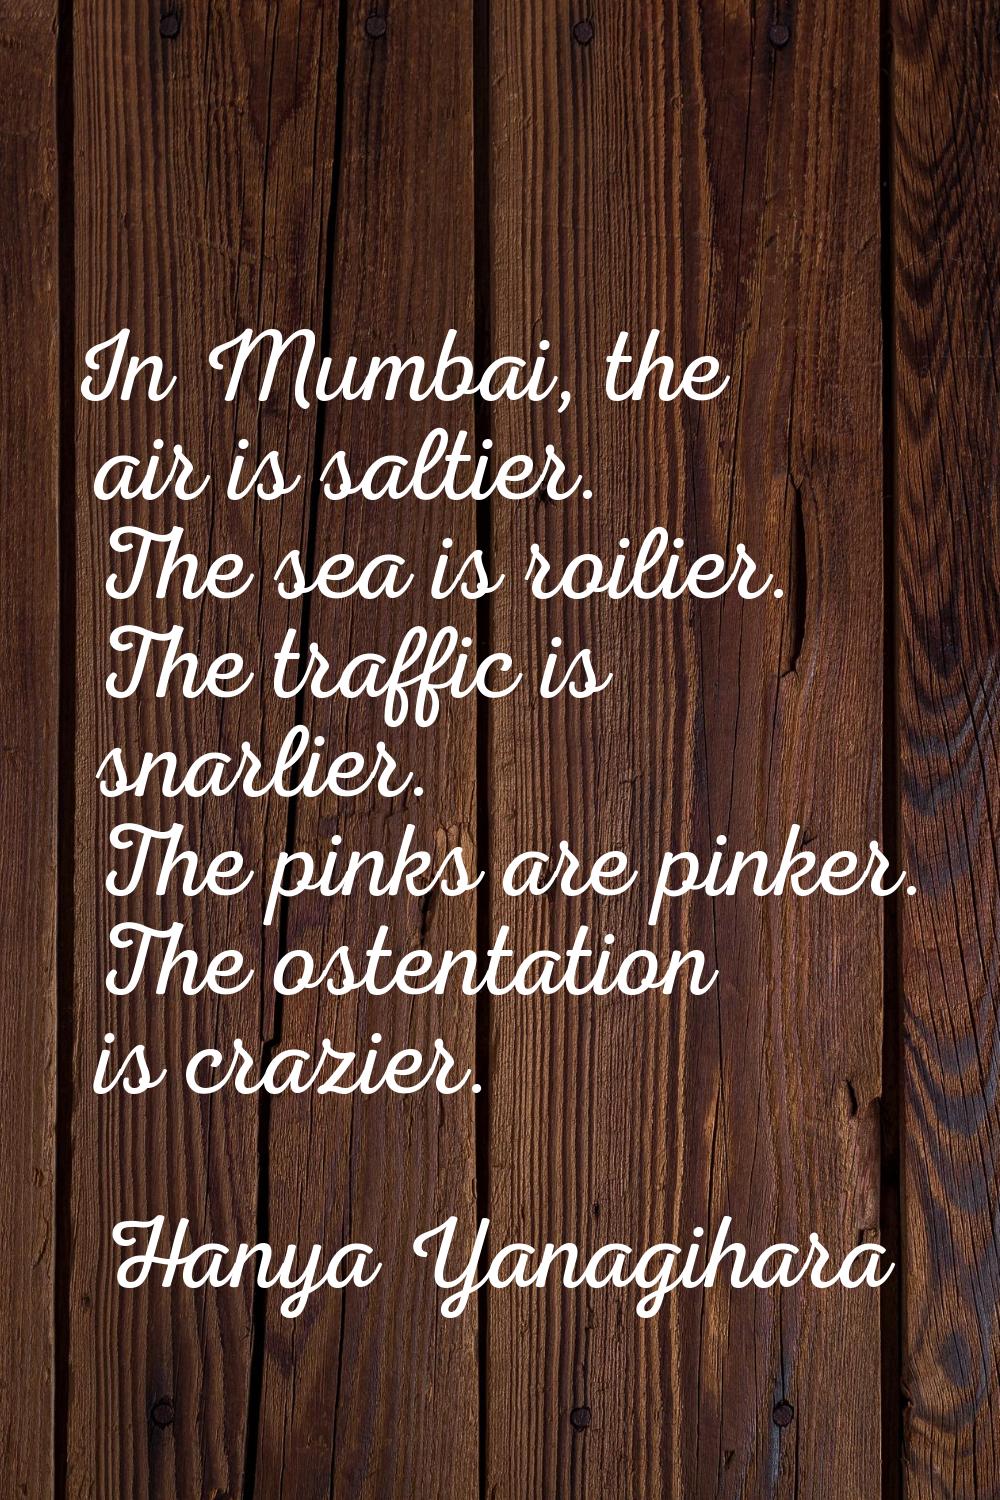 In Mumbai, the air is saltier. The sea is roilier. The traffic is snarlier. The pinks are pinker. T